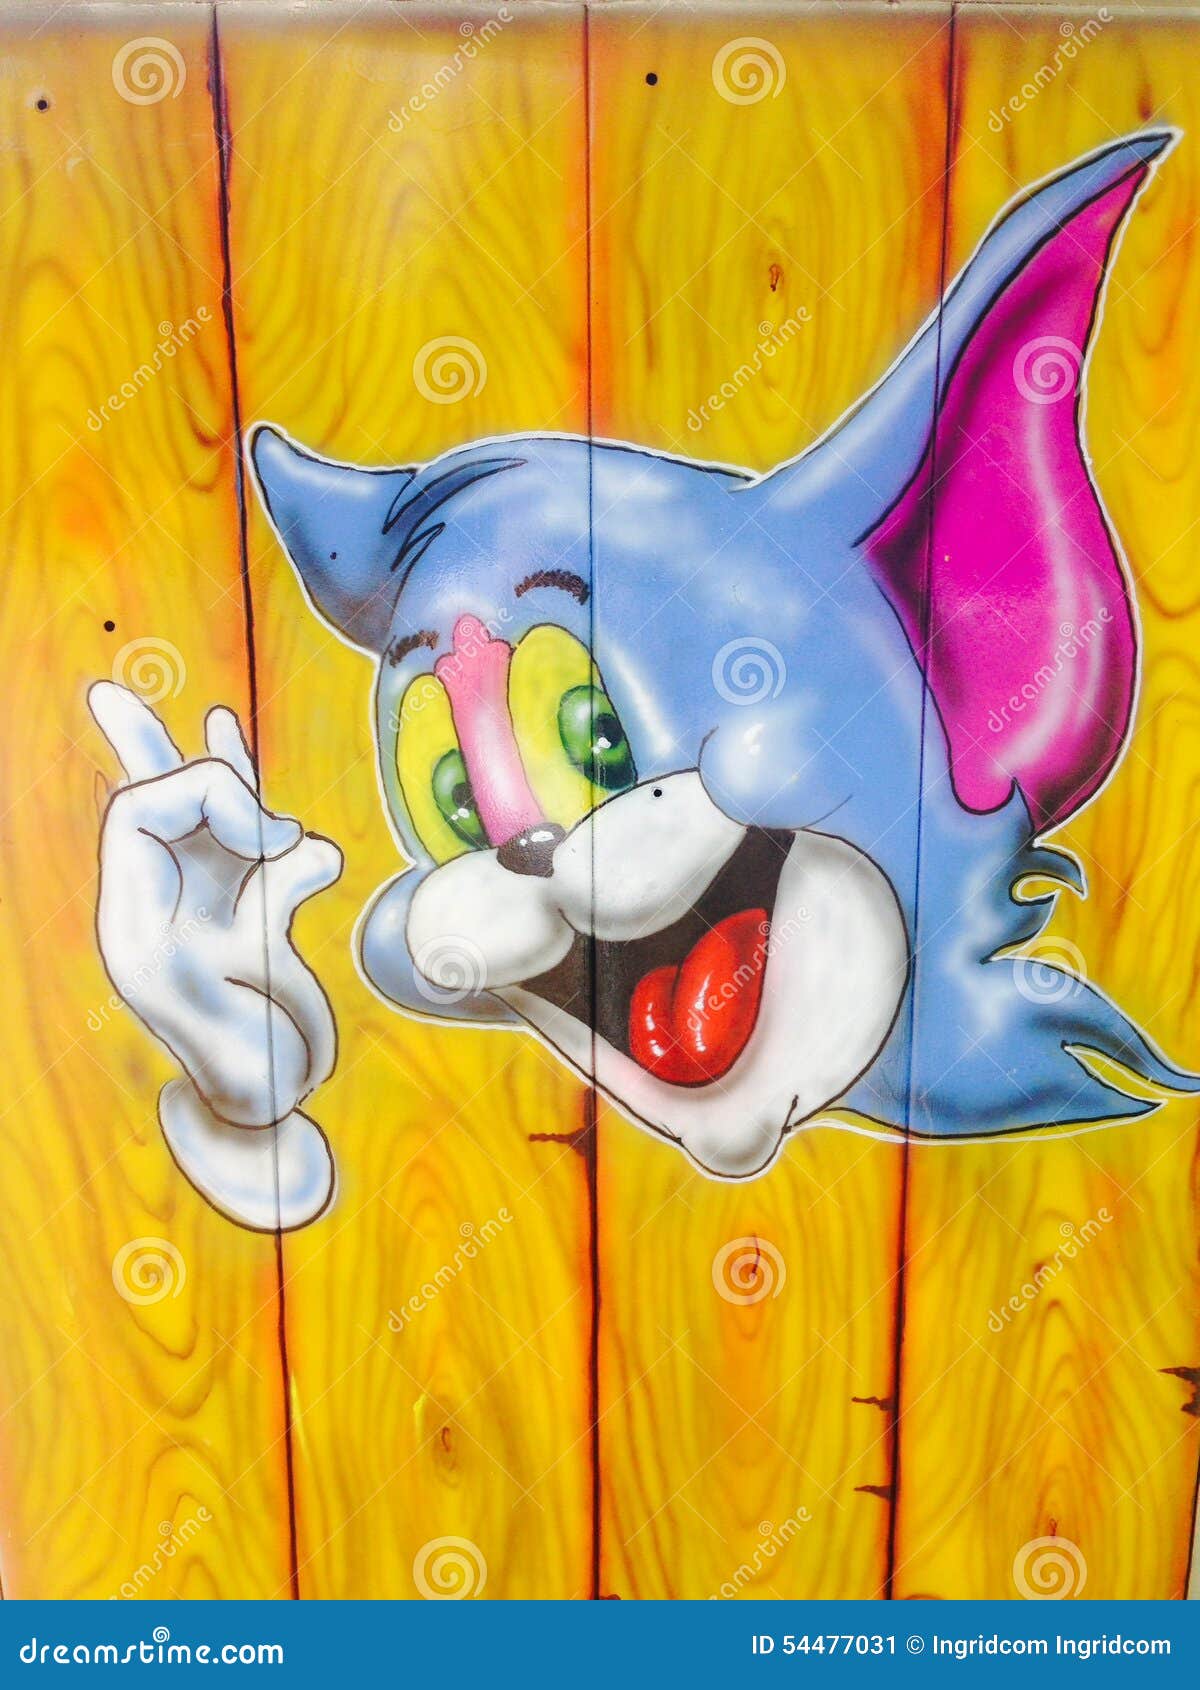 Jerry S Portrait (from Tom & Jerry Cartoons) on a Wooden Background  Editorial Photo - Image of background, portrait: 54477031